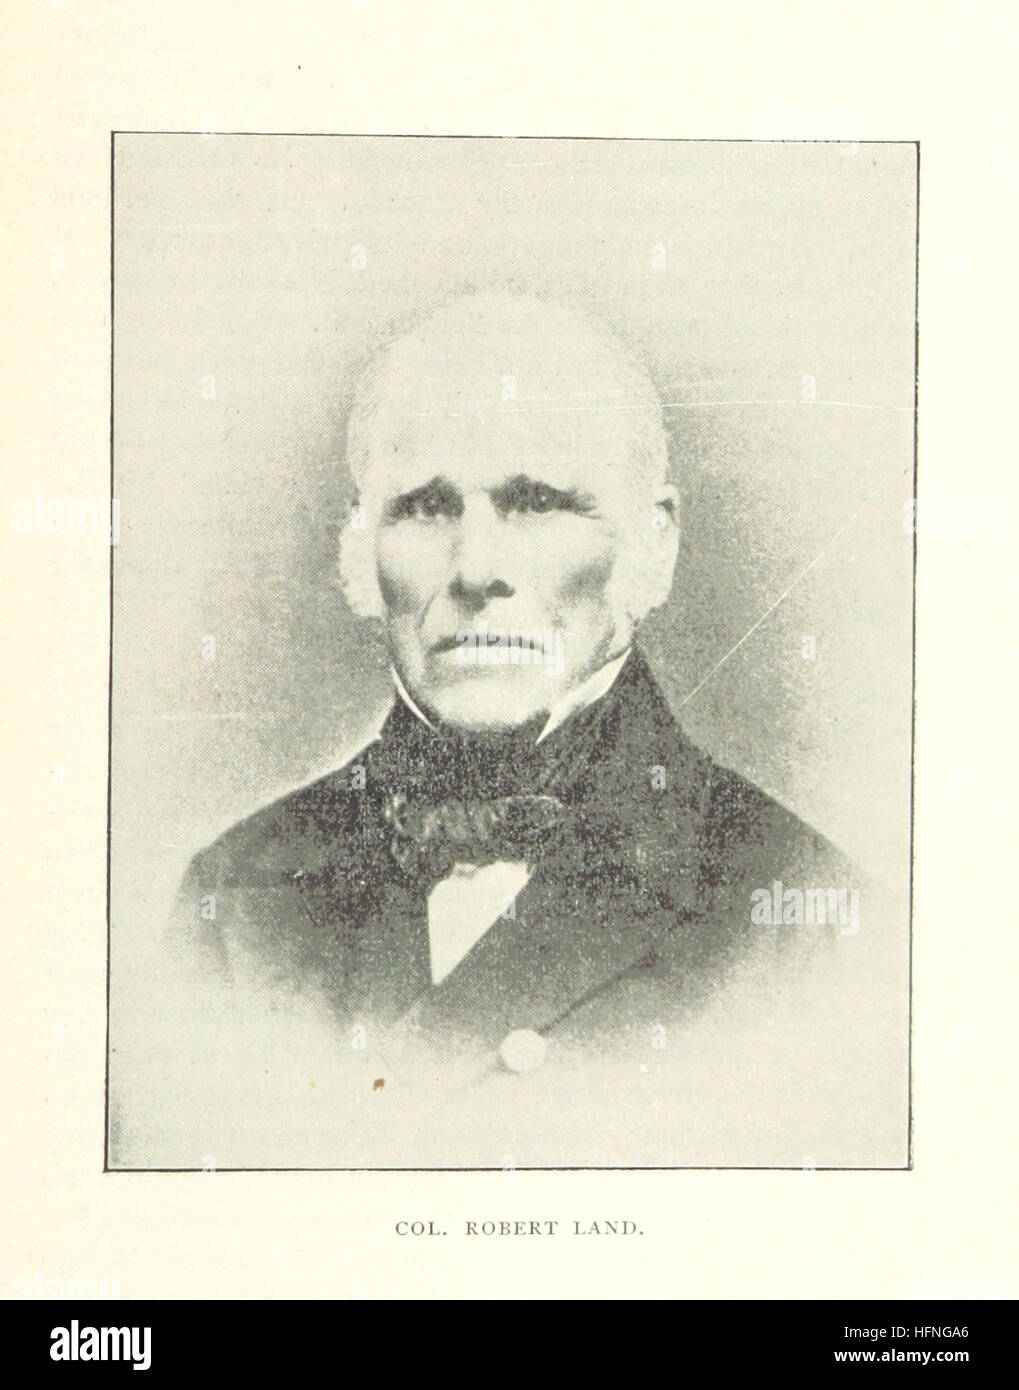 Image taken from page 53 of 'Historical Sketch of the County of Wentworth and the head of the lake' Image taken from page 53 of 'Historical Sketch of the Stock Photo